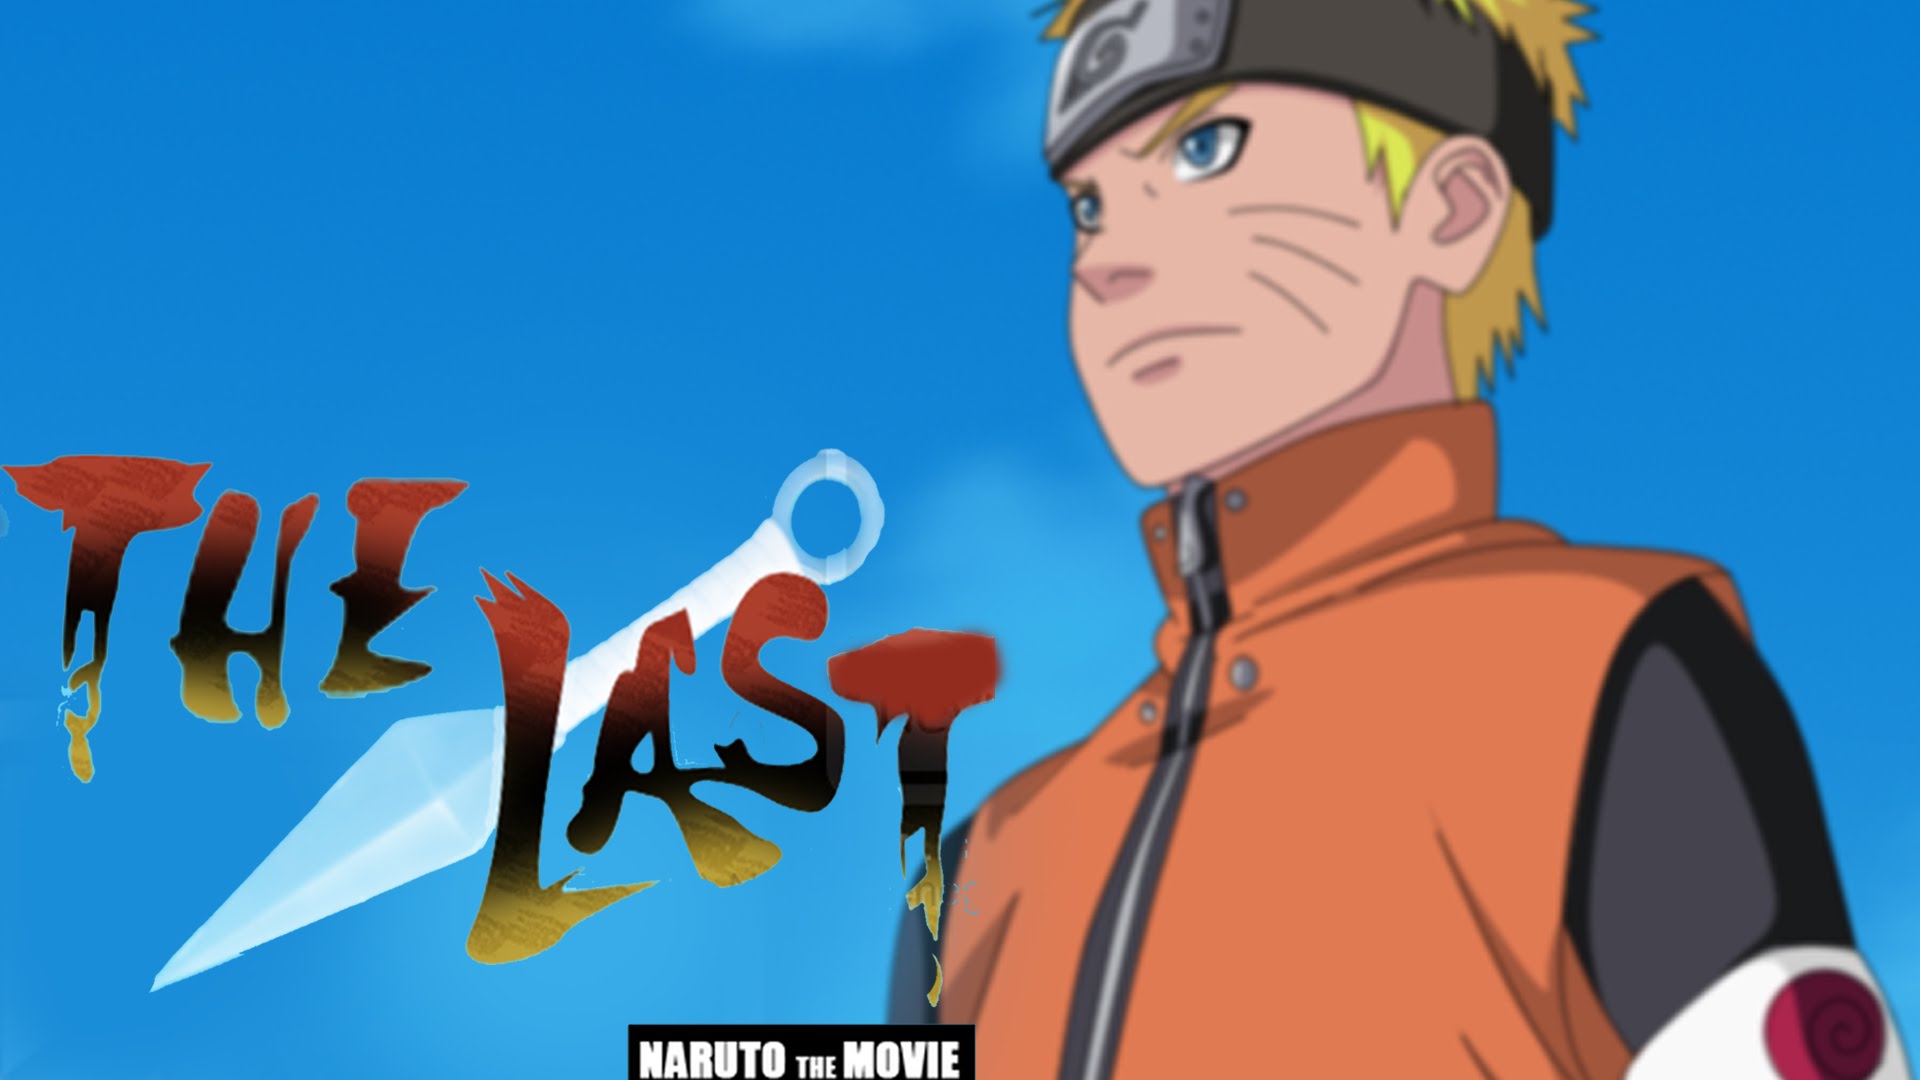 Why Did Naruto End Up With That Haircut? 